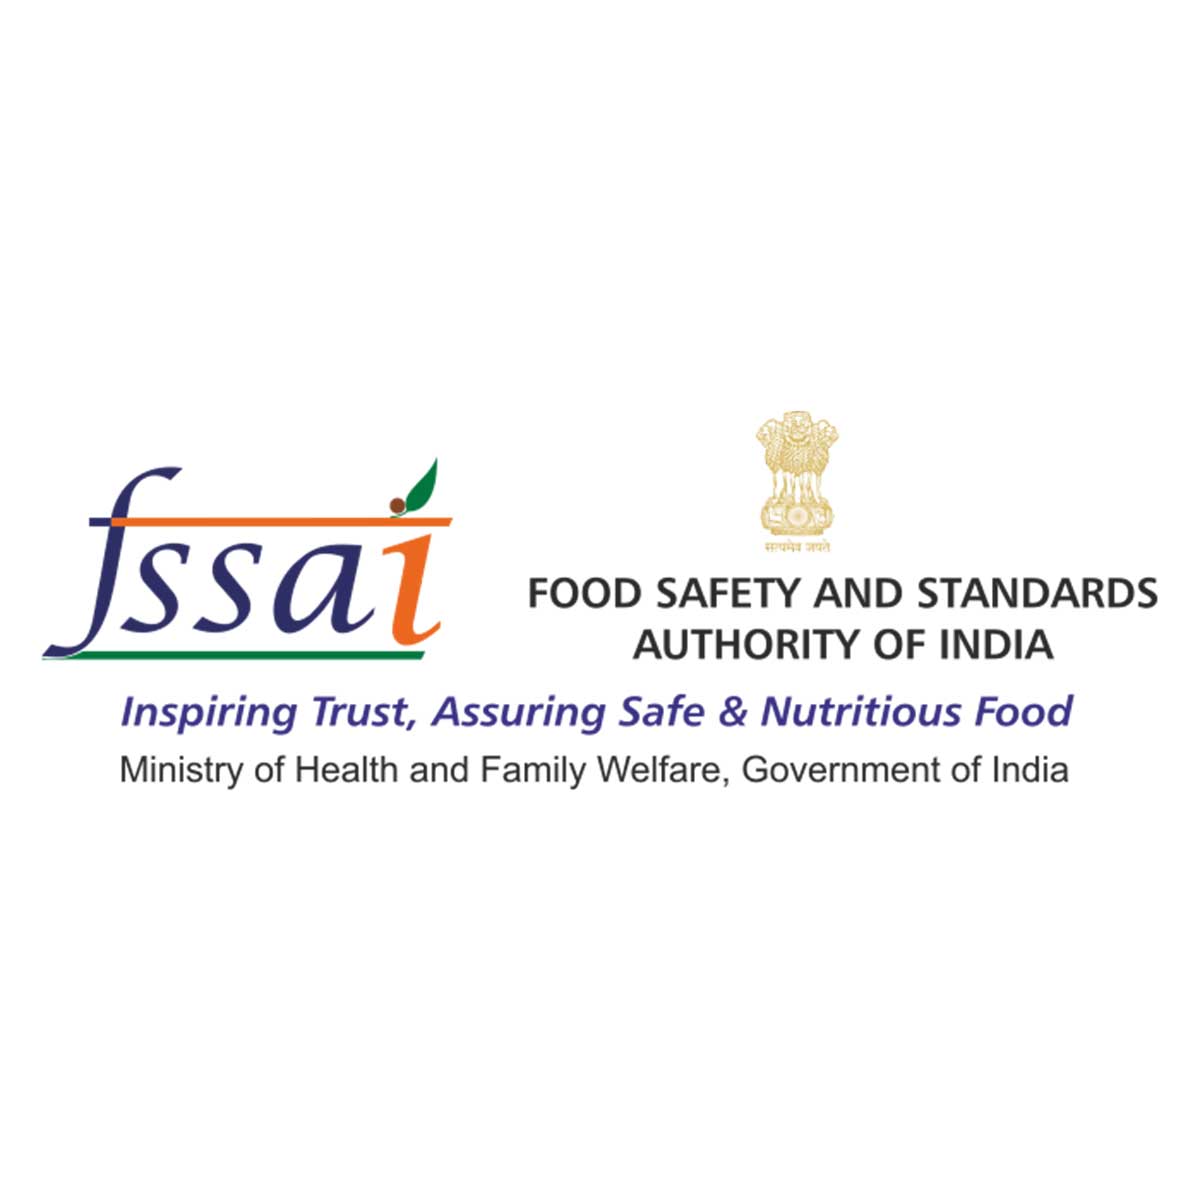 Fssai Recruitment - Food Safety And Standards Authority Of India Job Vacancies